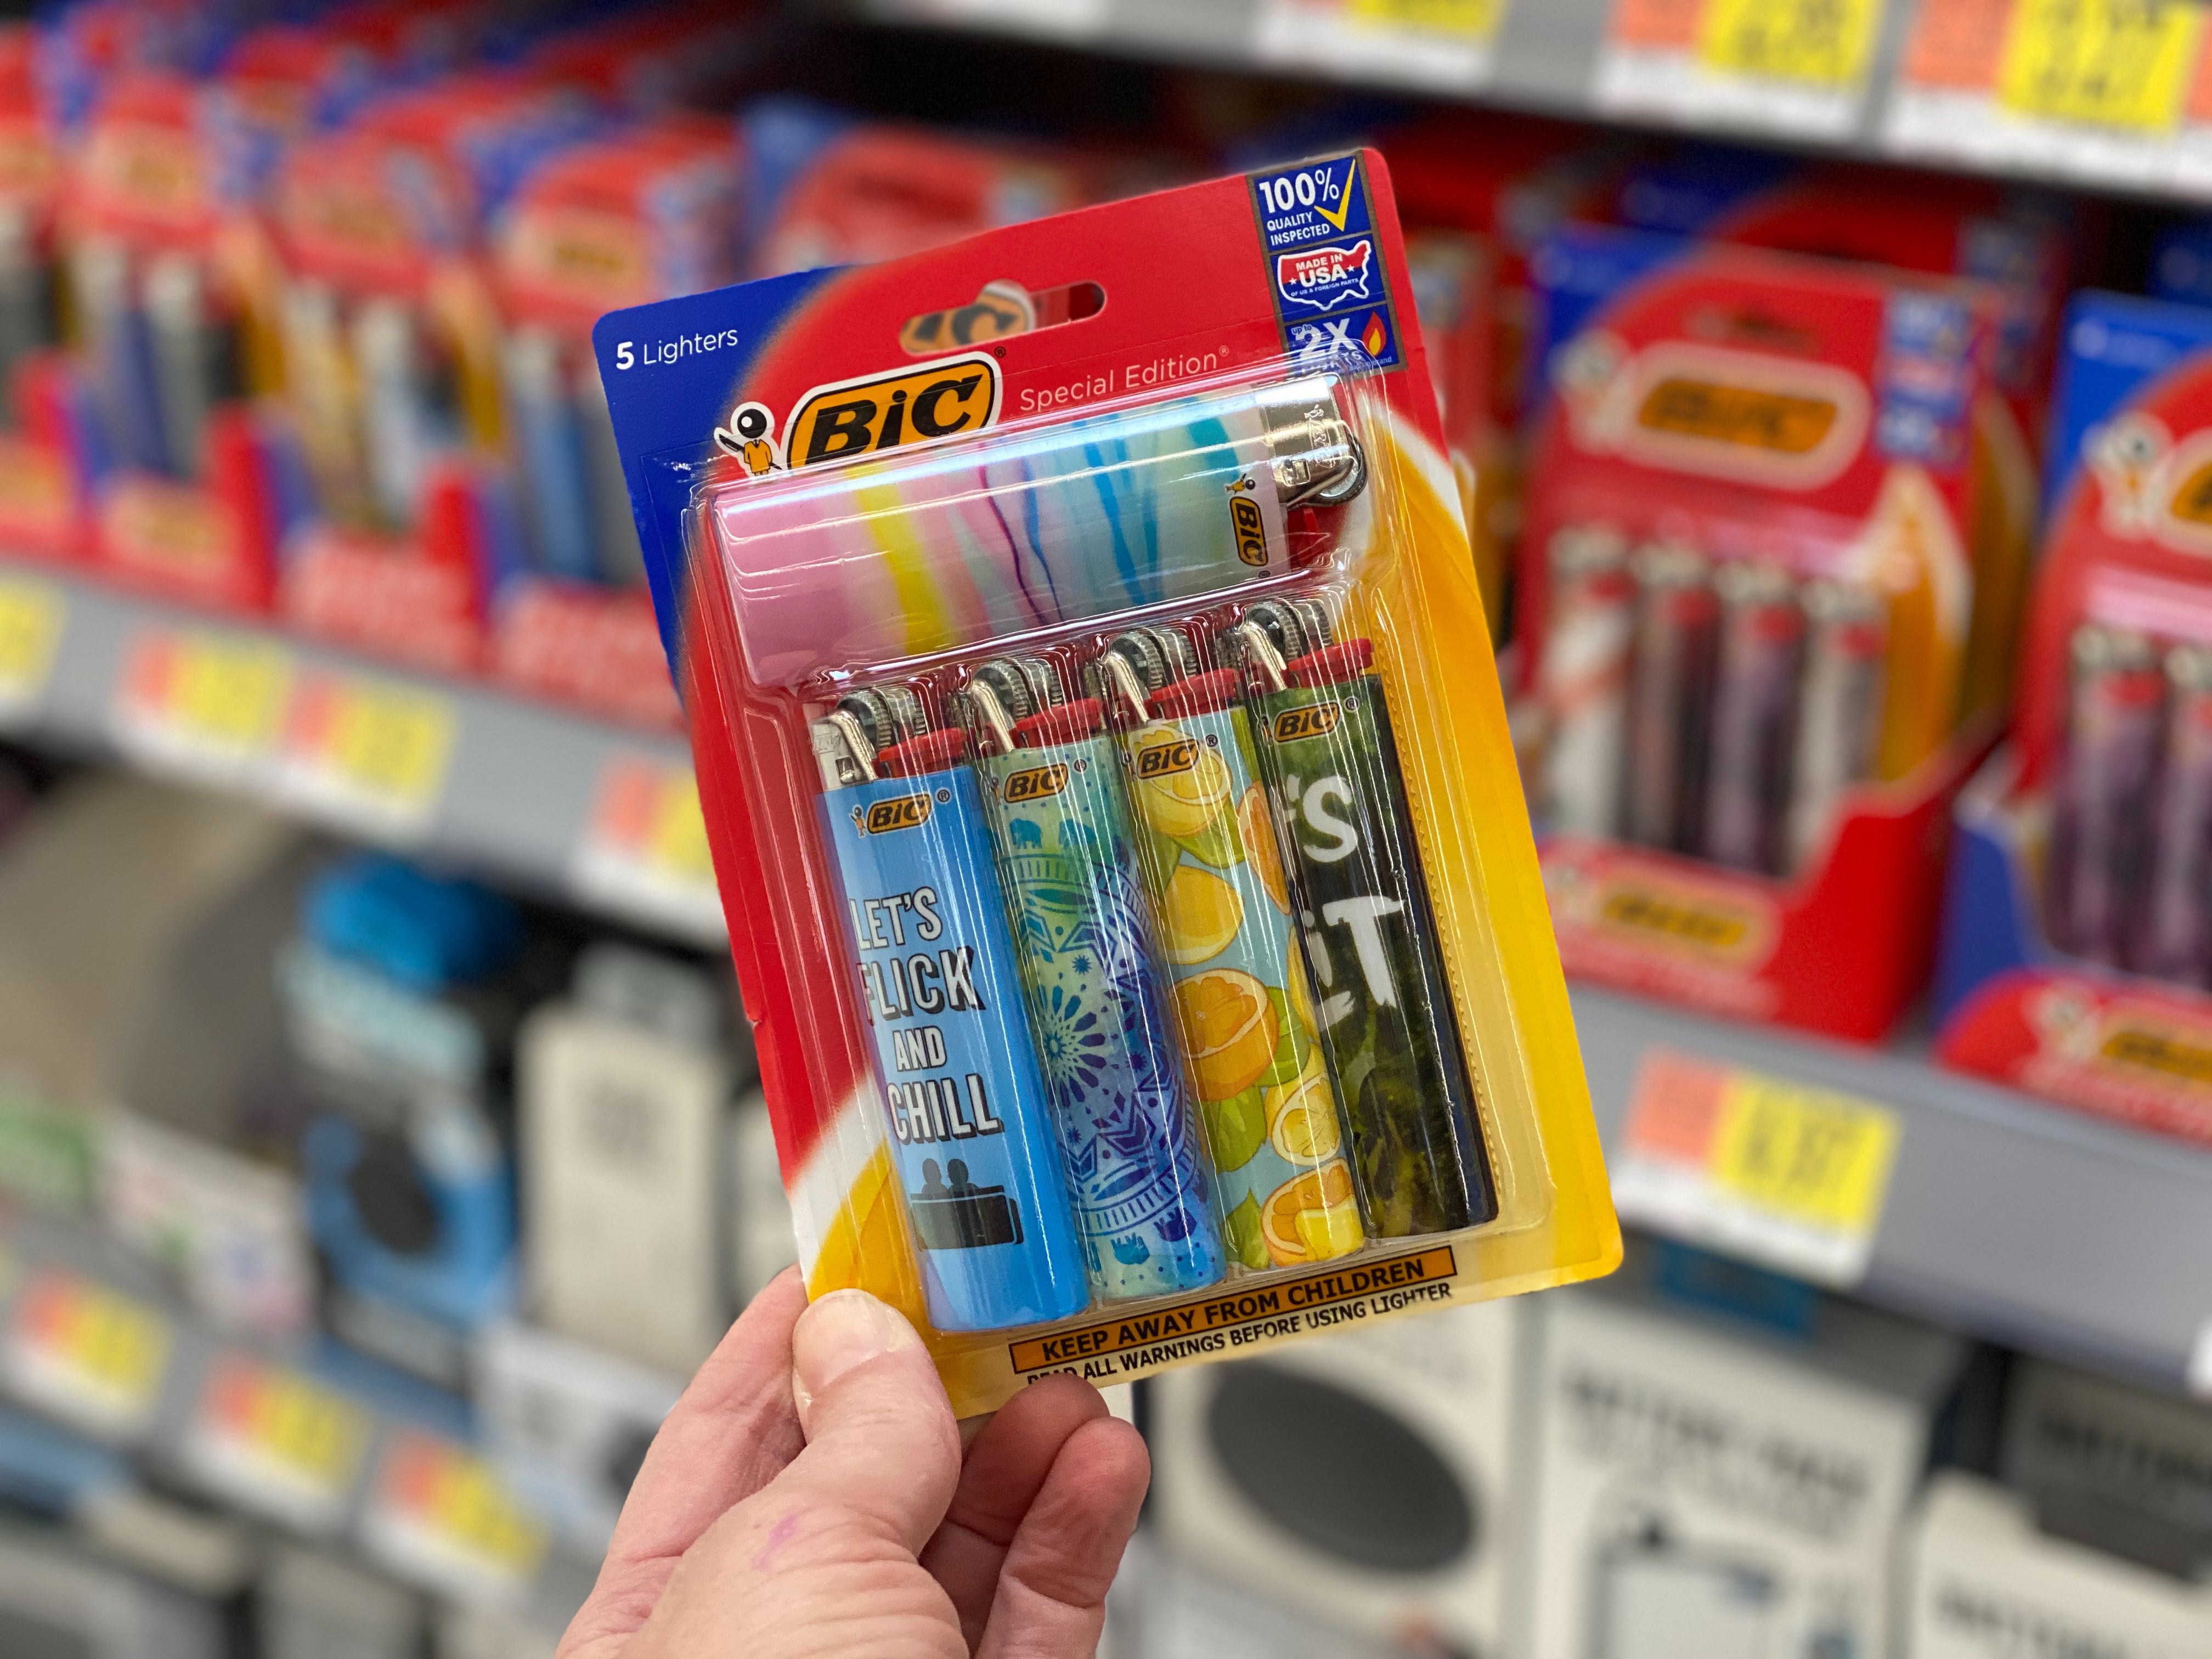 Use Your Phone 3 Off BIC Lighters at Walmart The Krazy Coupon Lady